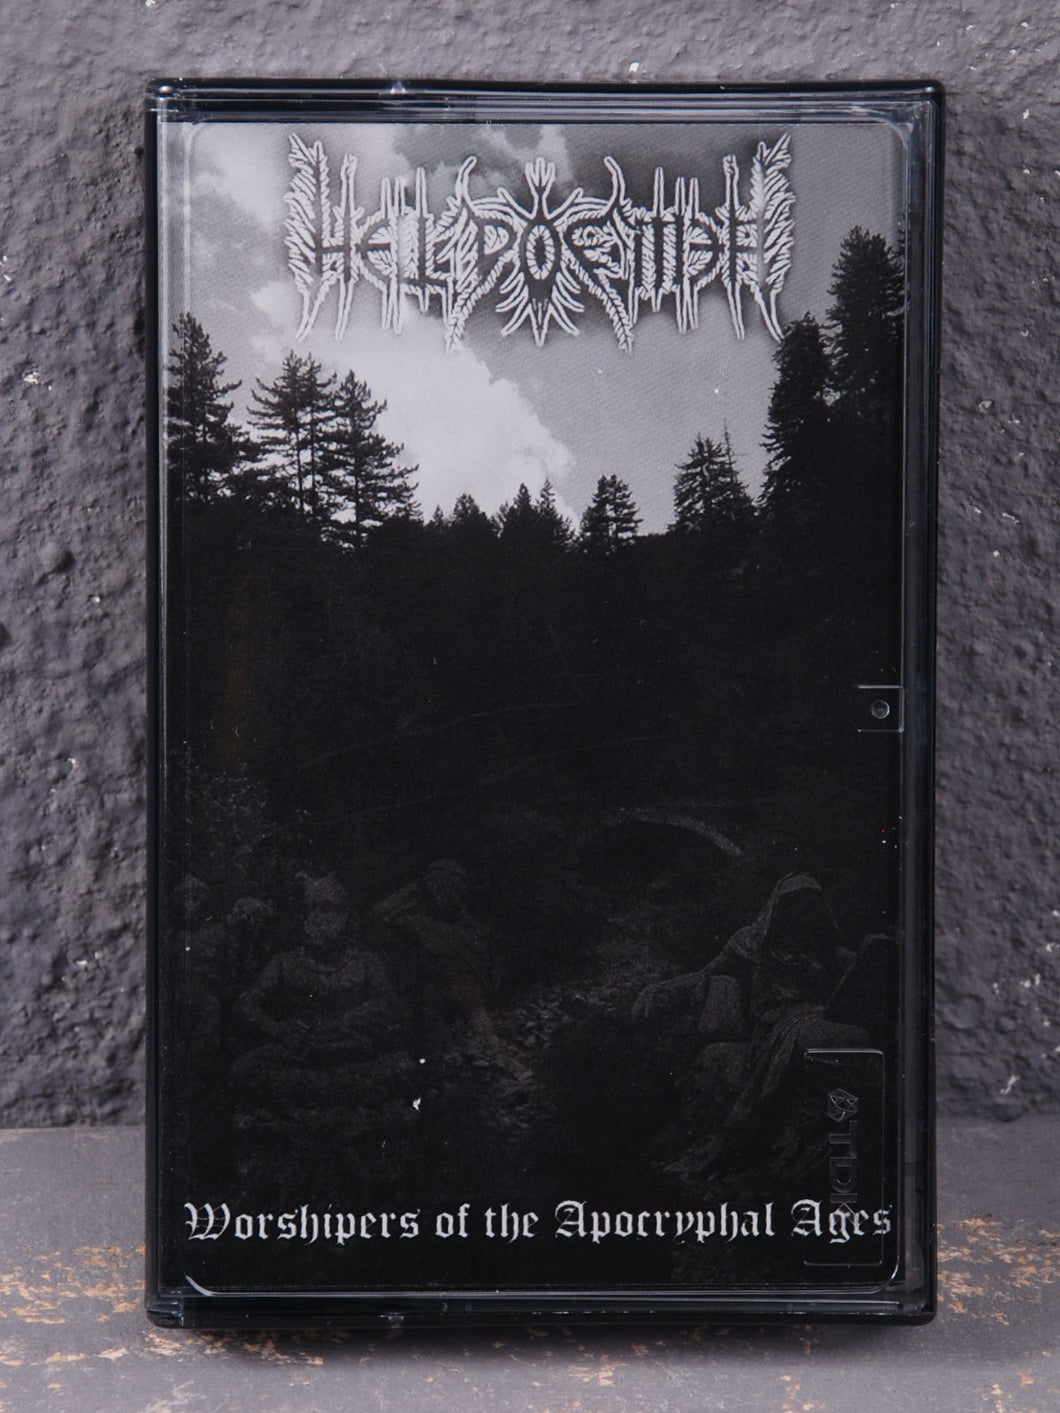 Hell Poemer - Worshipers of the Apocryphal Ages Cassette